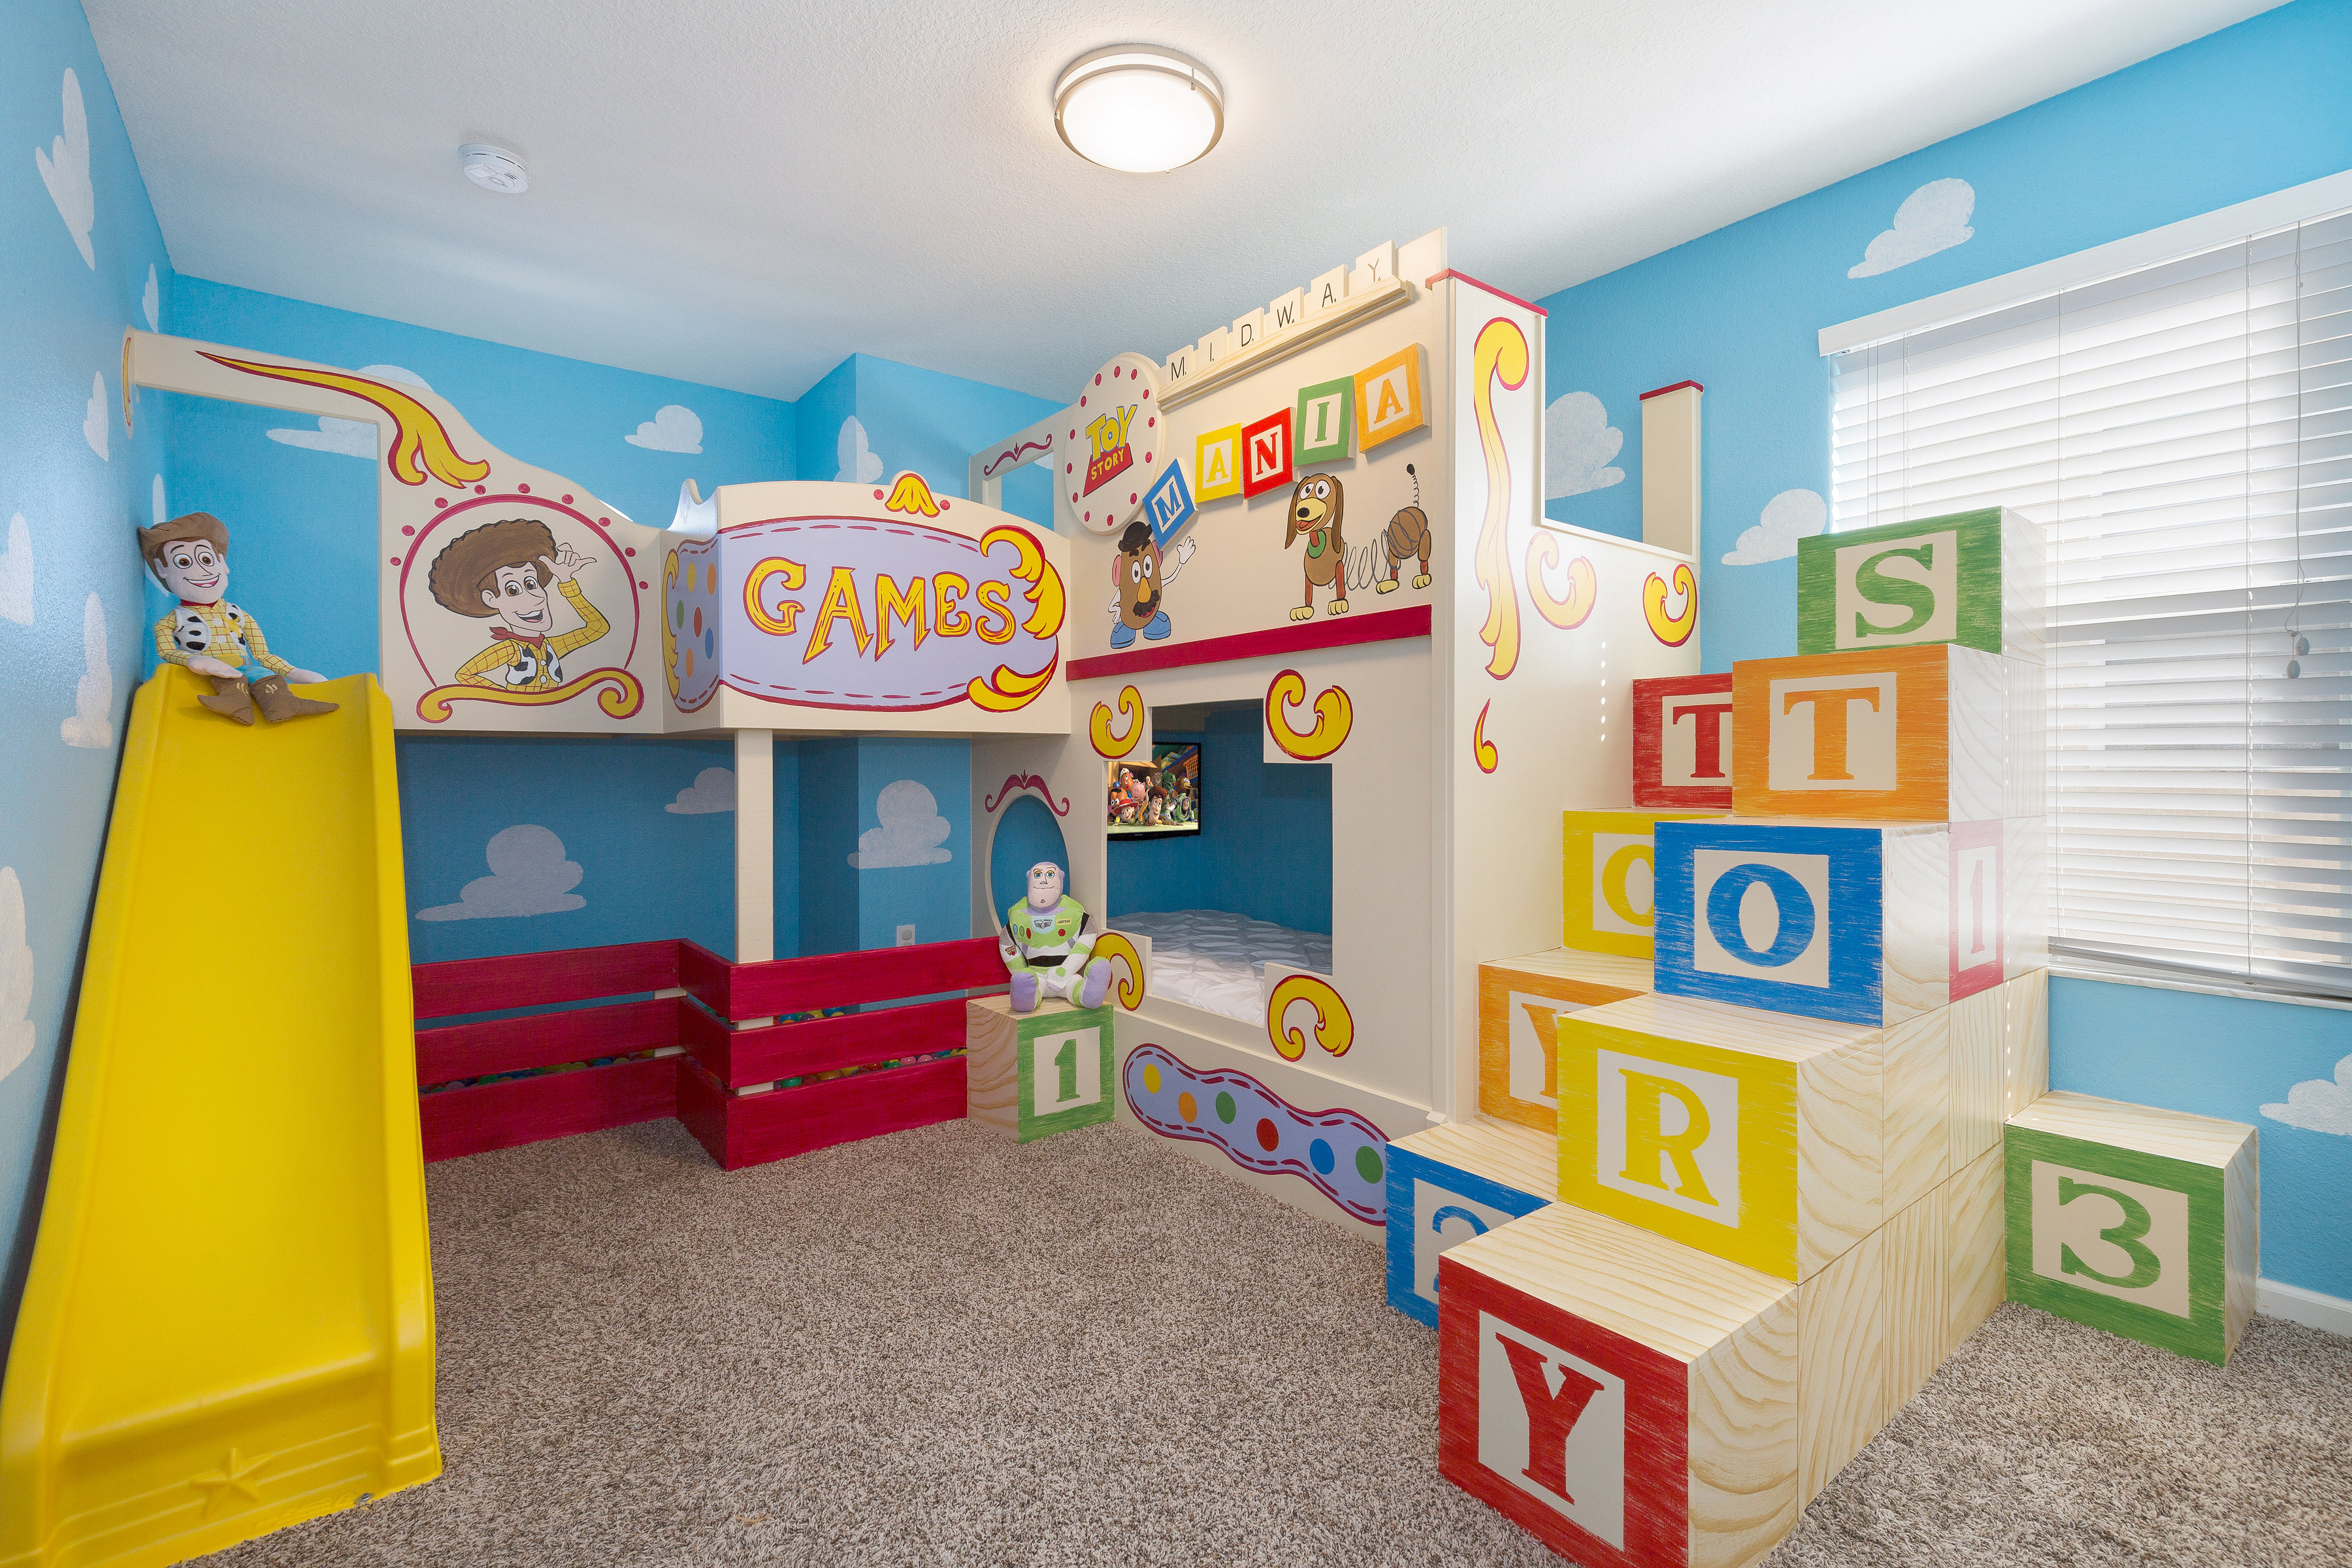 A custom-build children's bedroom that is toy-inspired with bunk beds, building blocks and a bed slide.